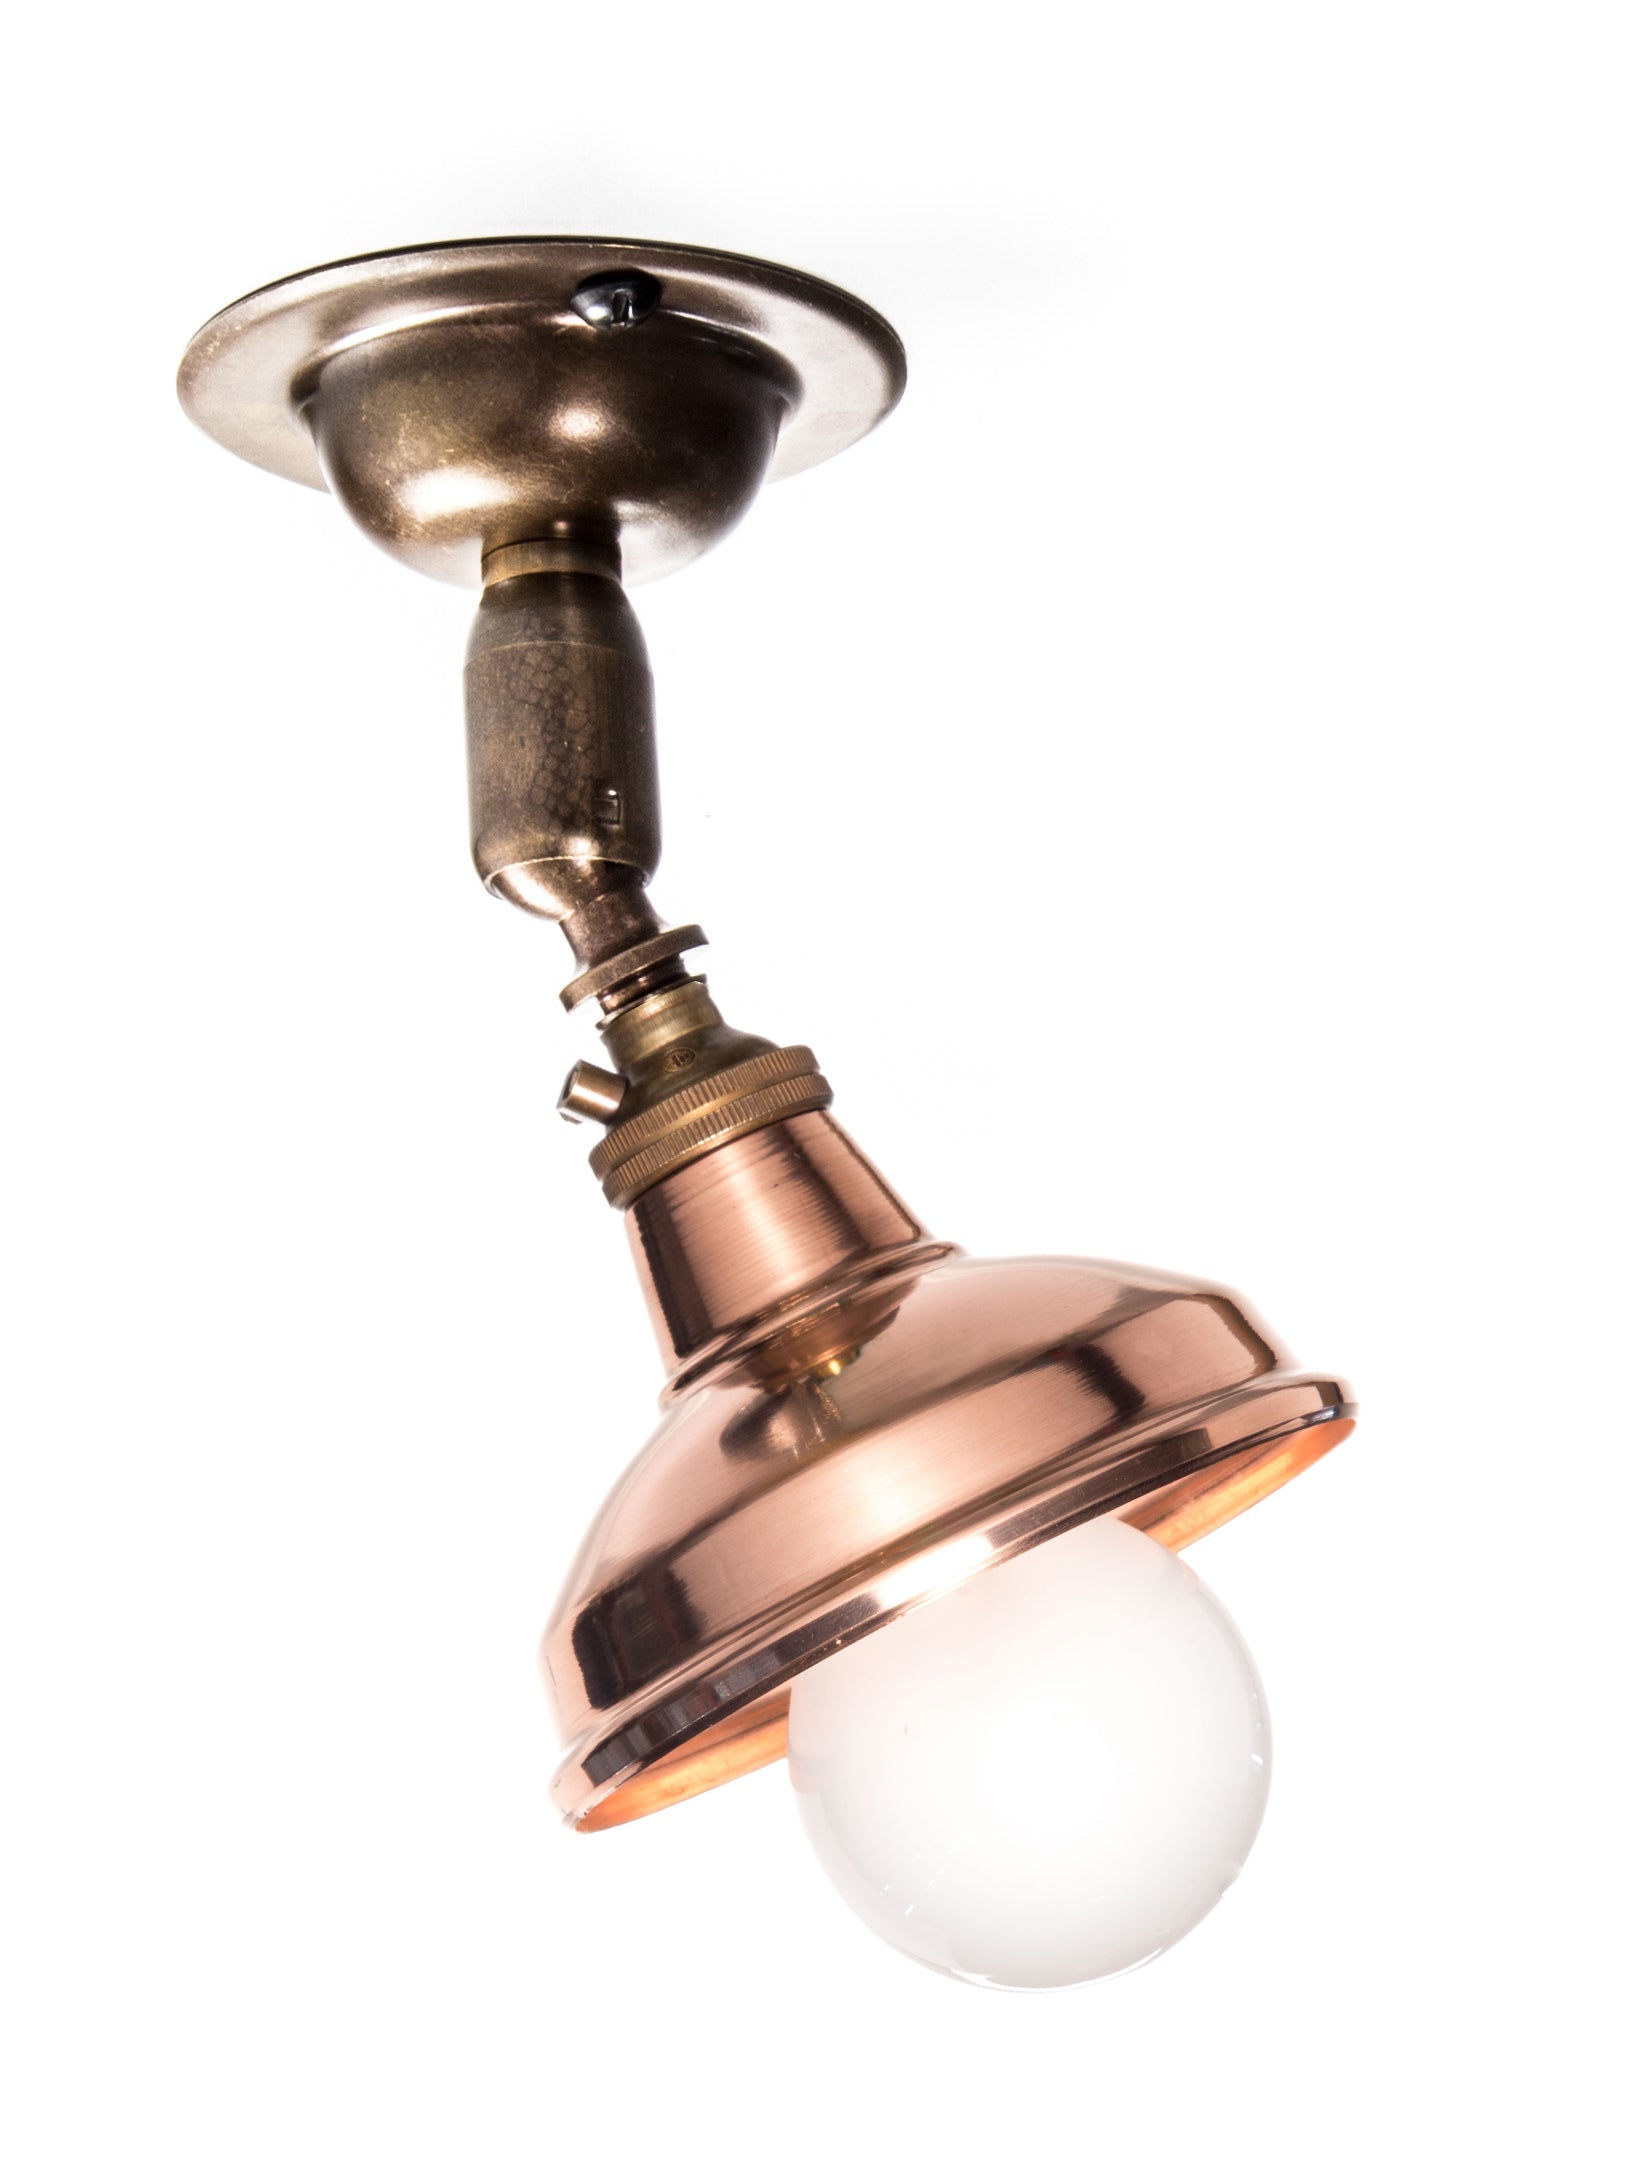 Vintage Brass Maria Spotlight | Ceiling Light With Copper Shade | End-Of-Line